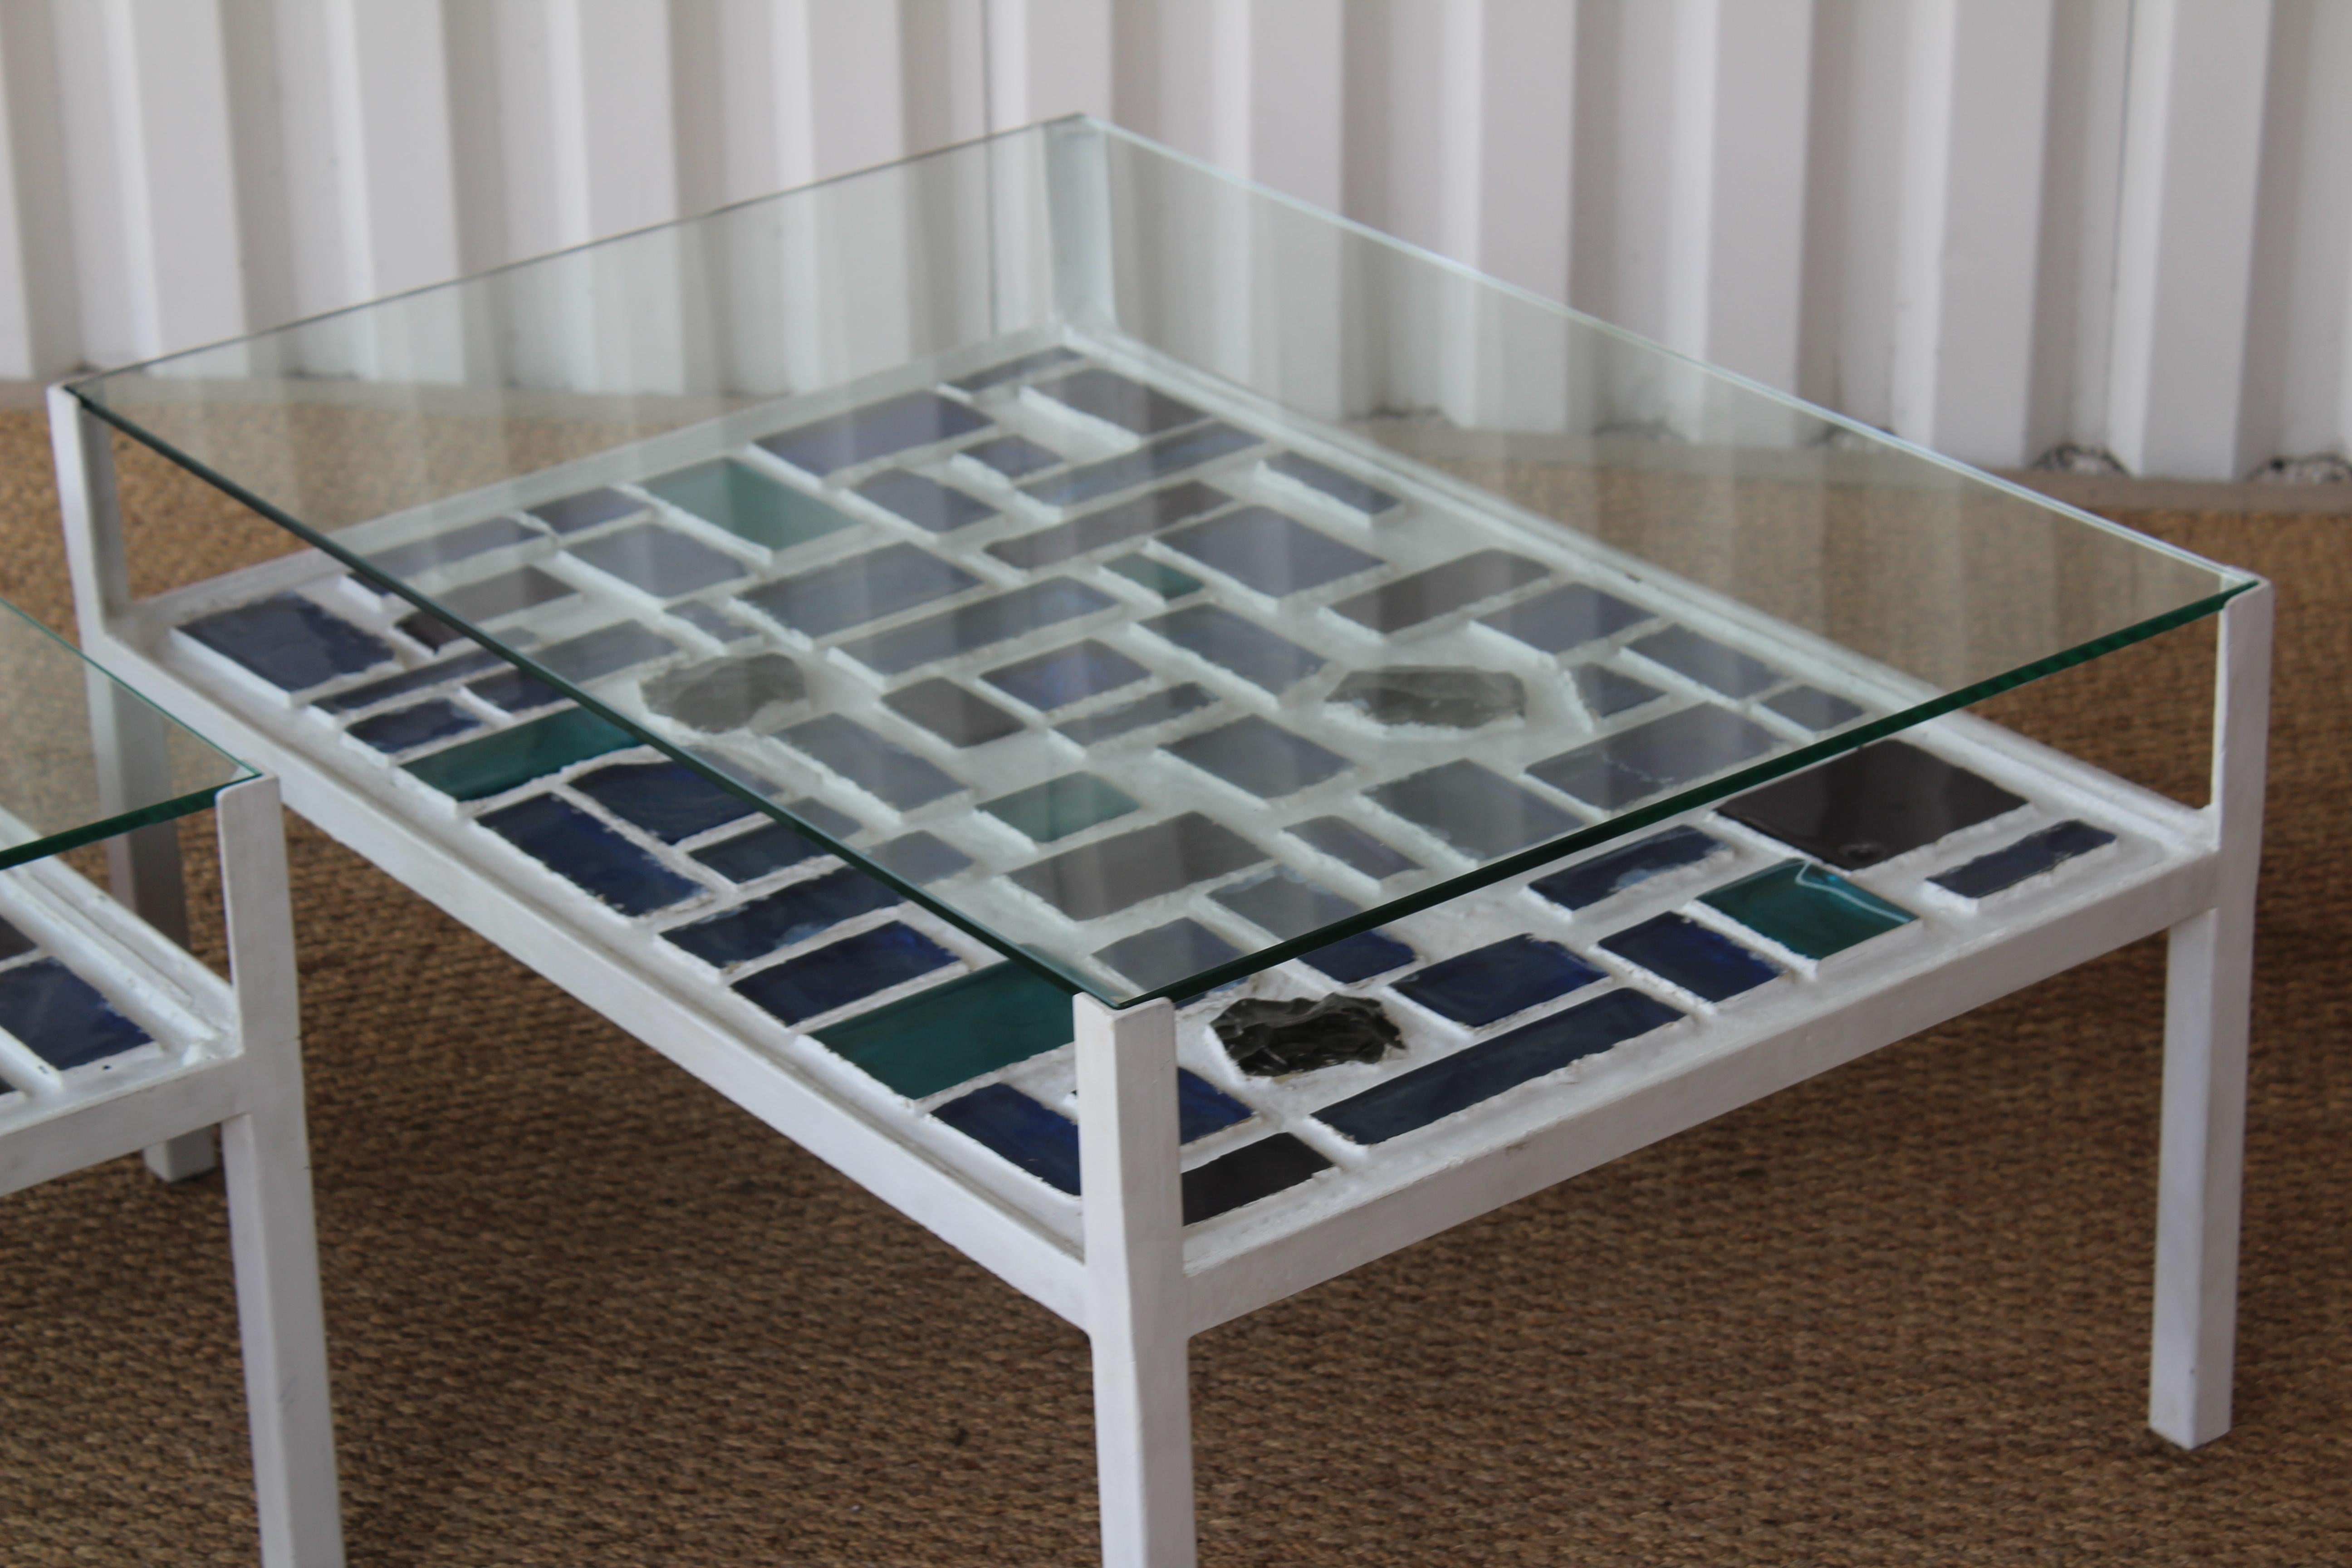 Pair of Mosaic Steel and Glass Coffee Tables by M. Mellini, Italy, 1974 In Good Condition For Sale In Los Angeles, CA